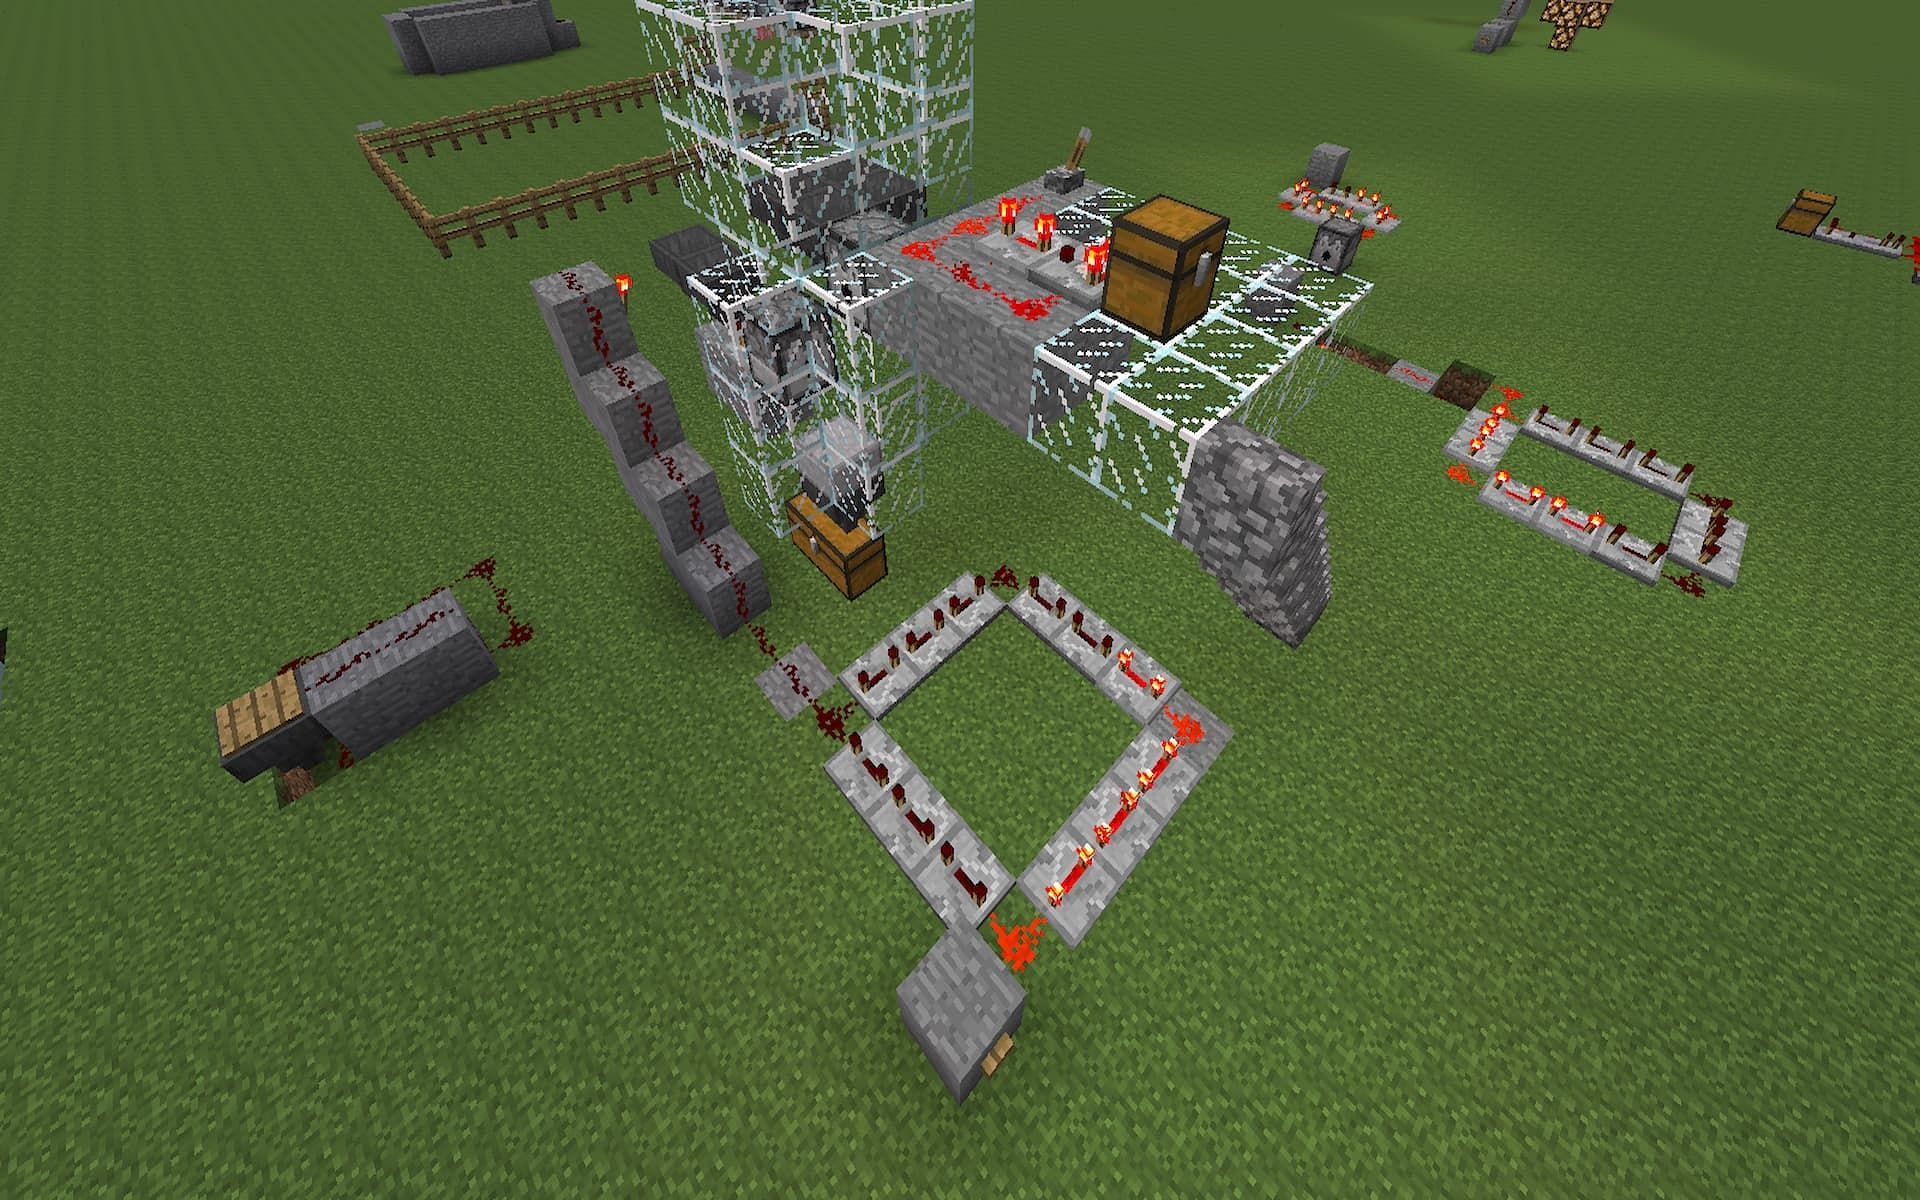 Redstone Automations for your Ultimate Minecraft Base